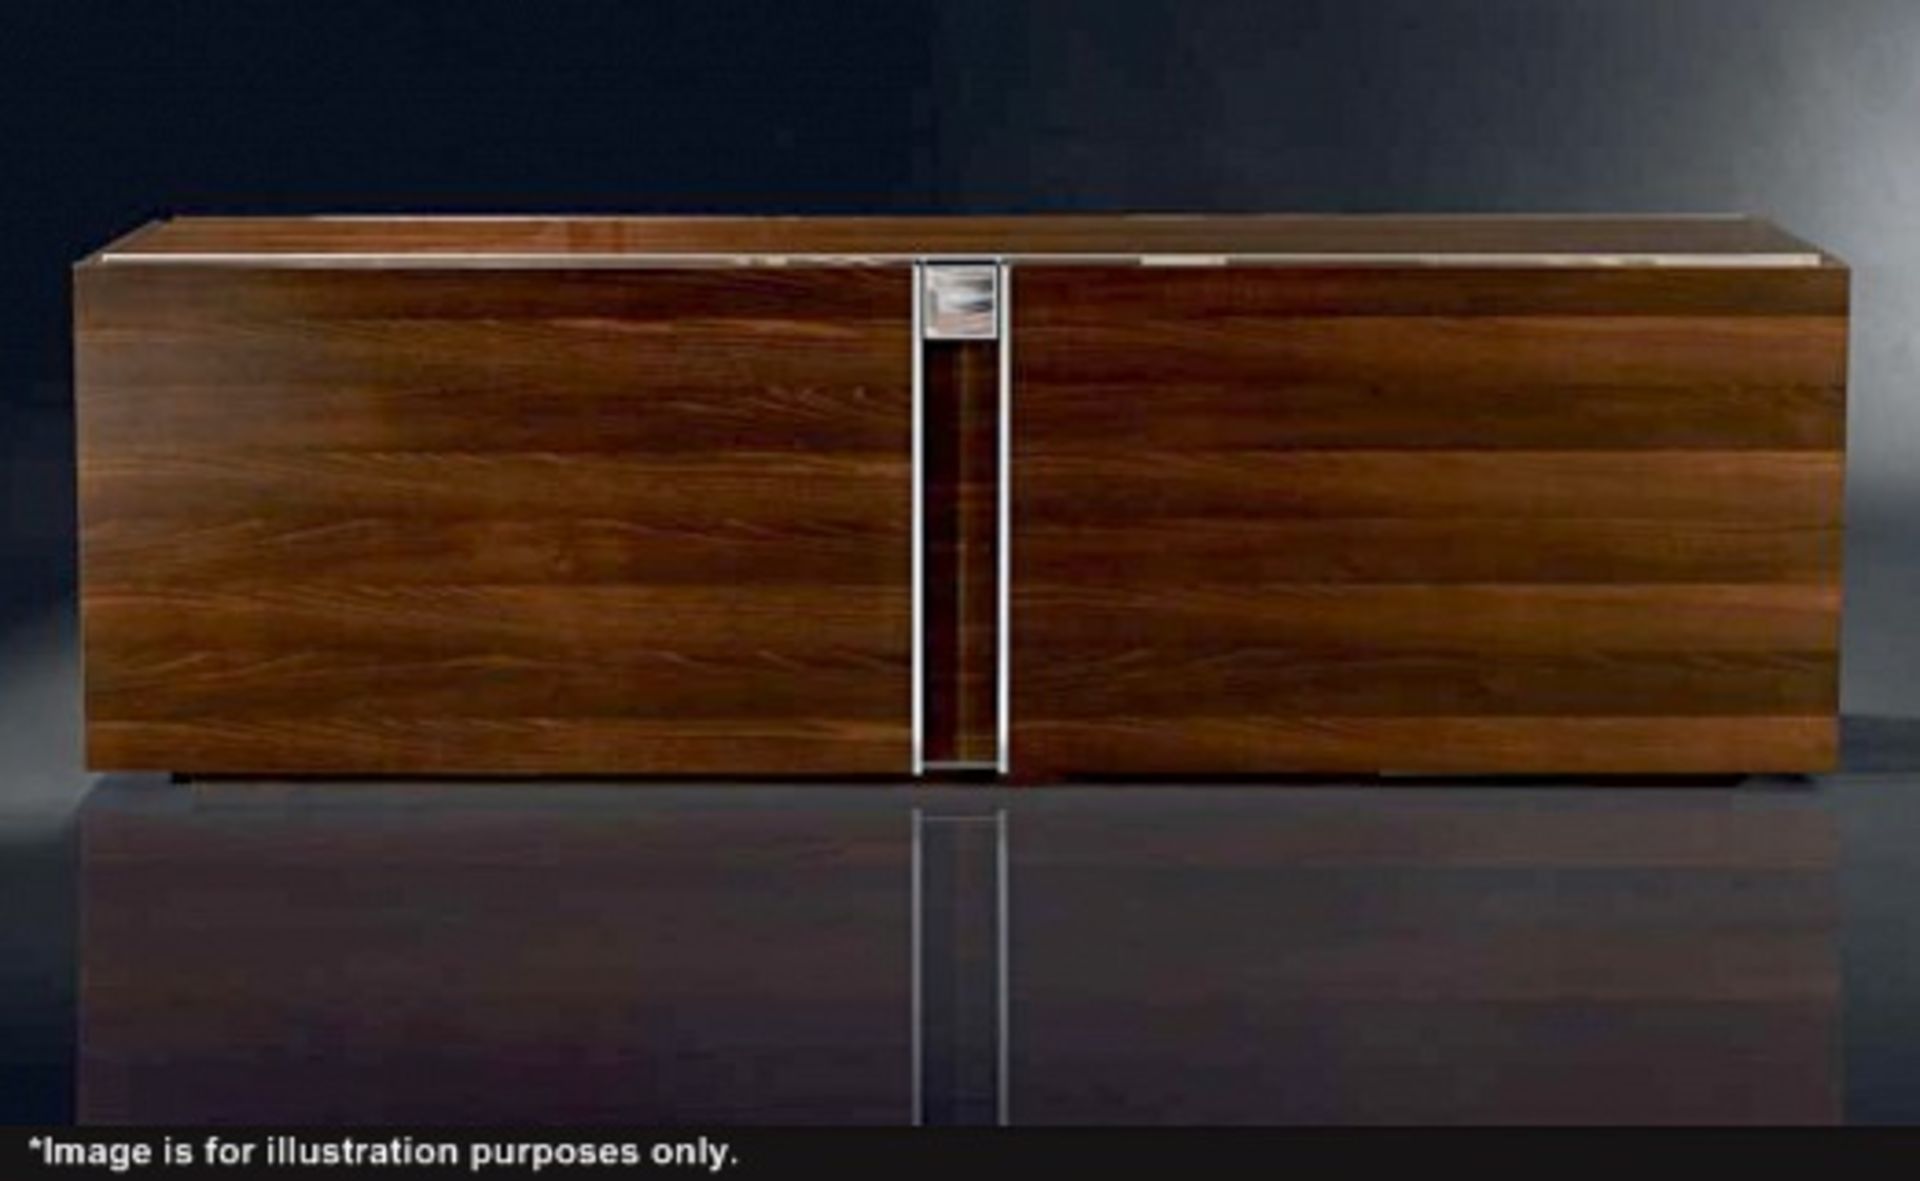 1 x MALERBA "Dress Code" Buffet  / Sideboard - Made From South African Karoo With Lacquer Finish - - Image 10 of 11